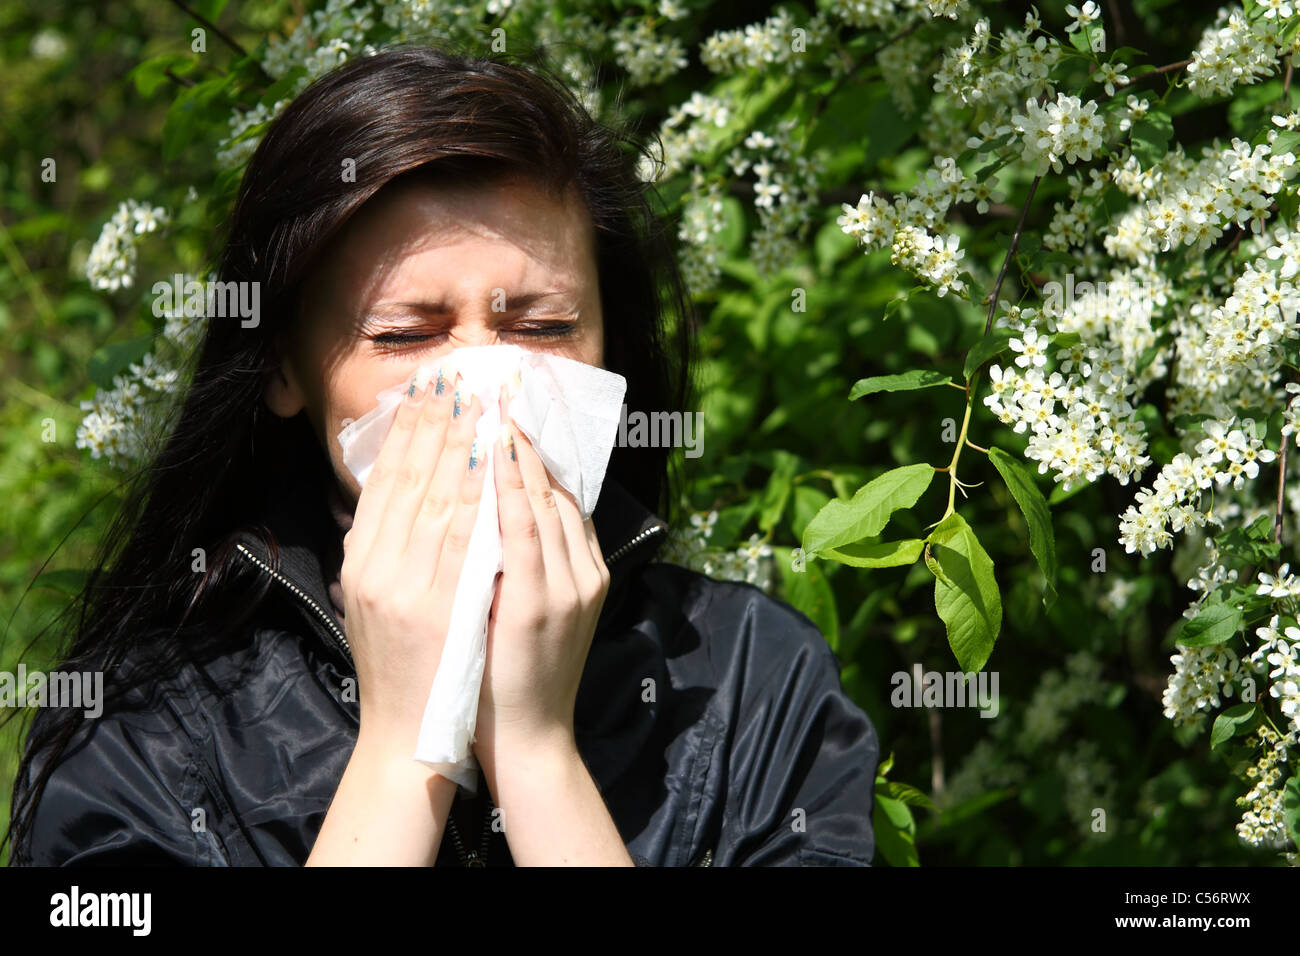 allergy to pollen: young woman blowing nose among flowers Stock Photo